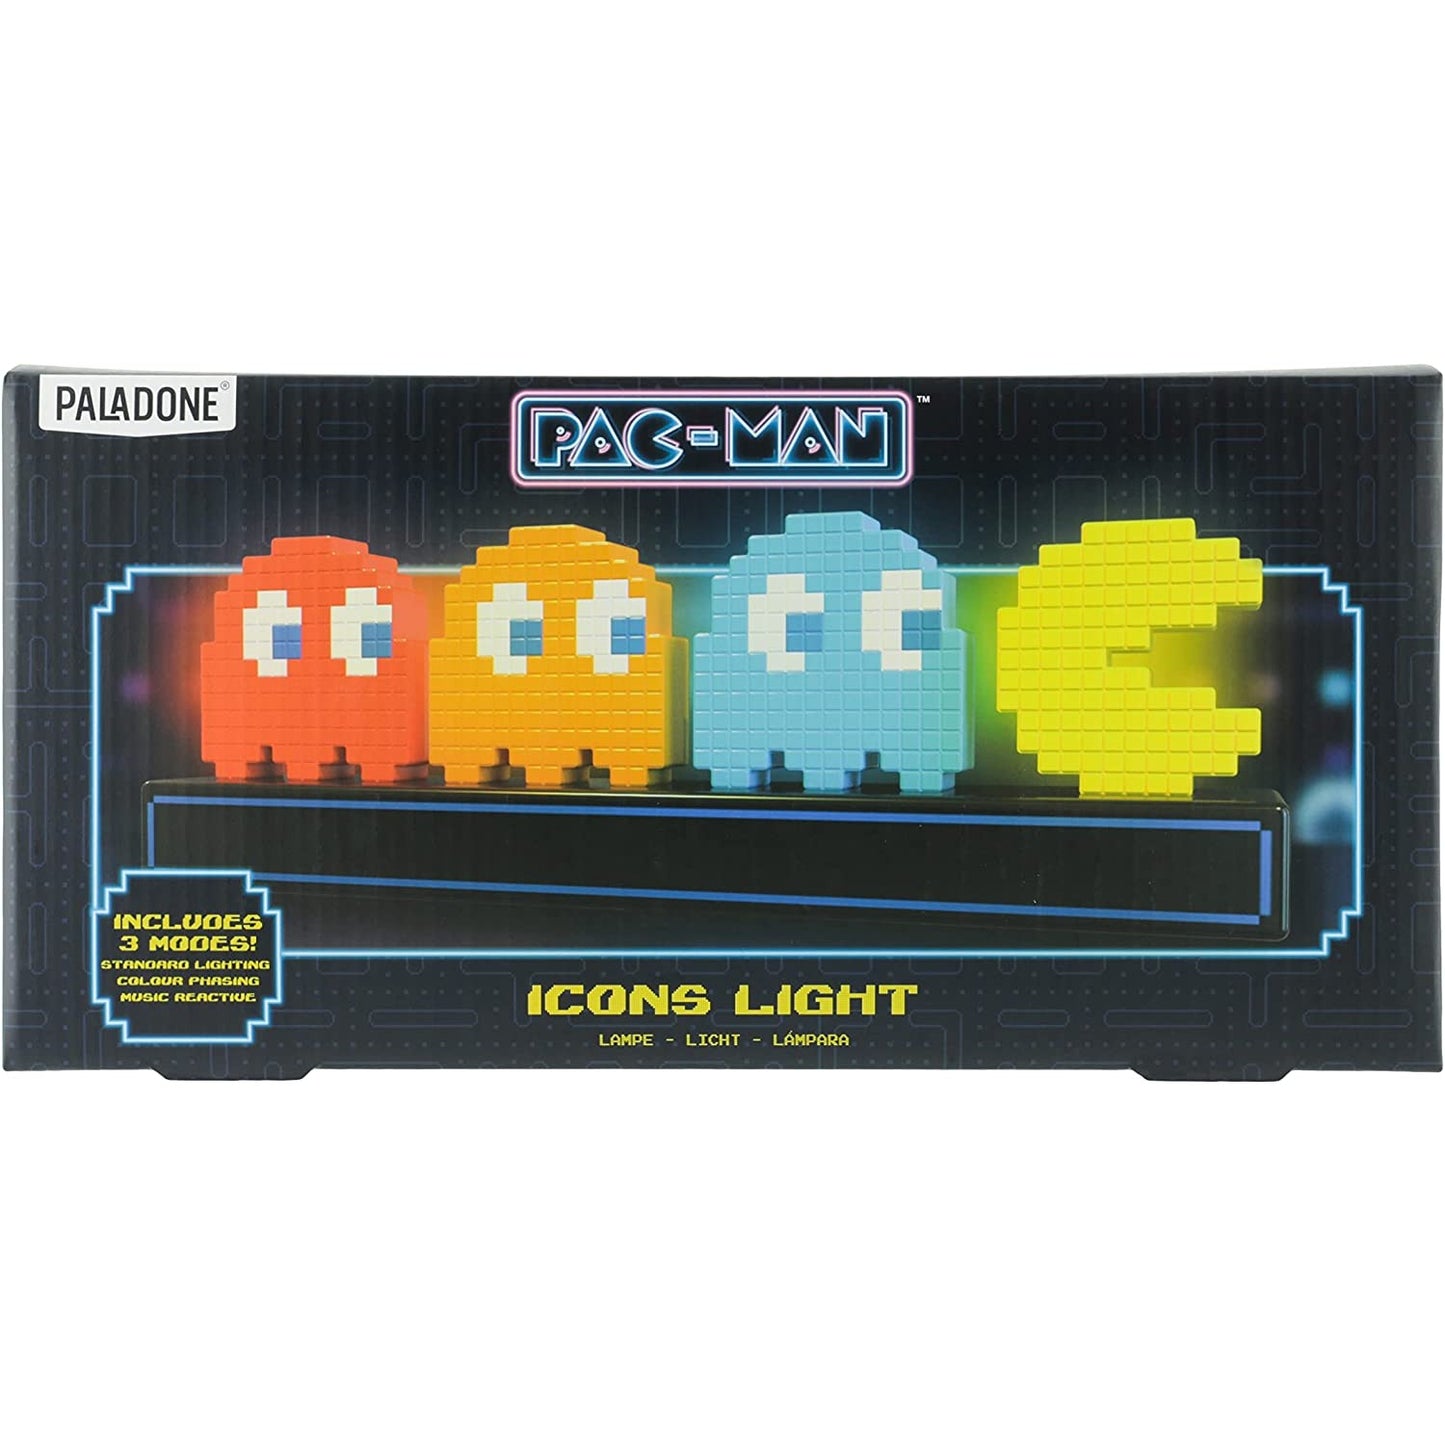 The boxed packaging for a Pac-Man with ghosts retro style light.